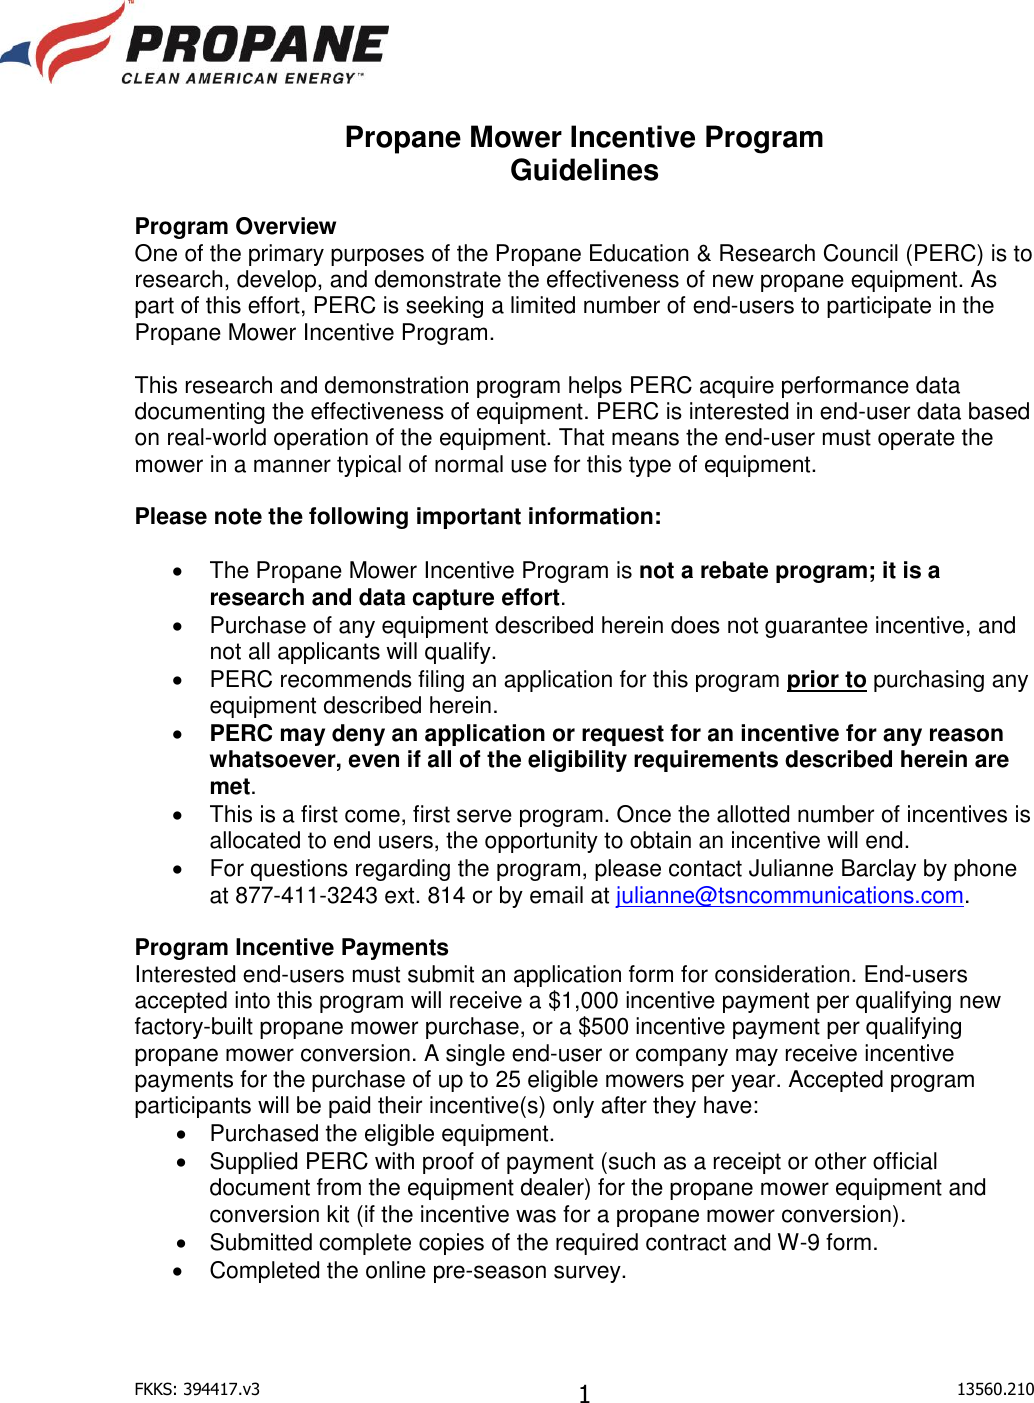 Page 1 of 7 - !! 2015 Propane Mower Incentive Guidelines - Feb